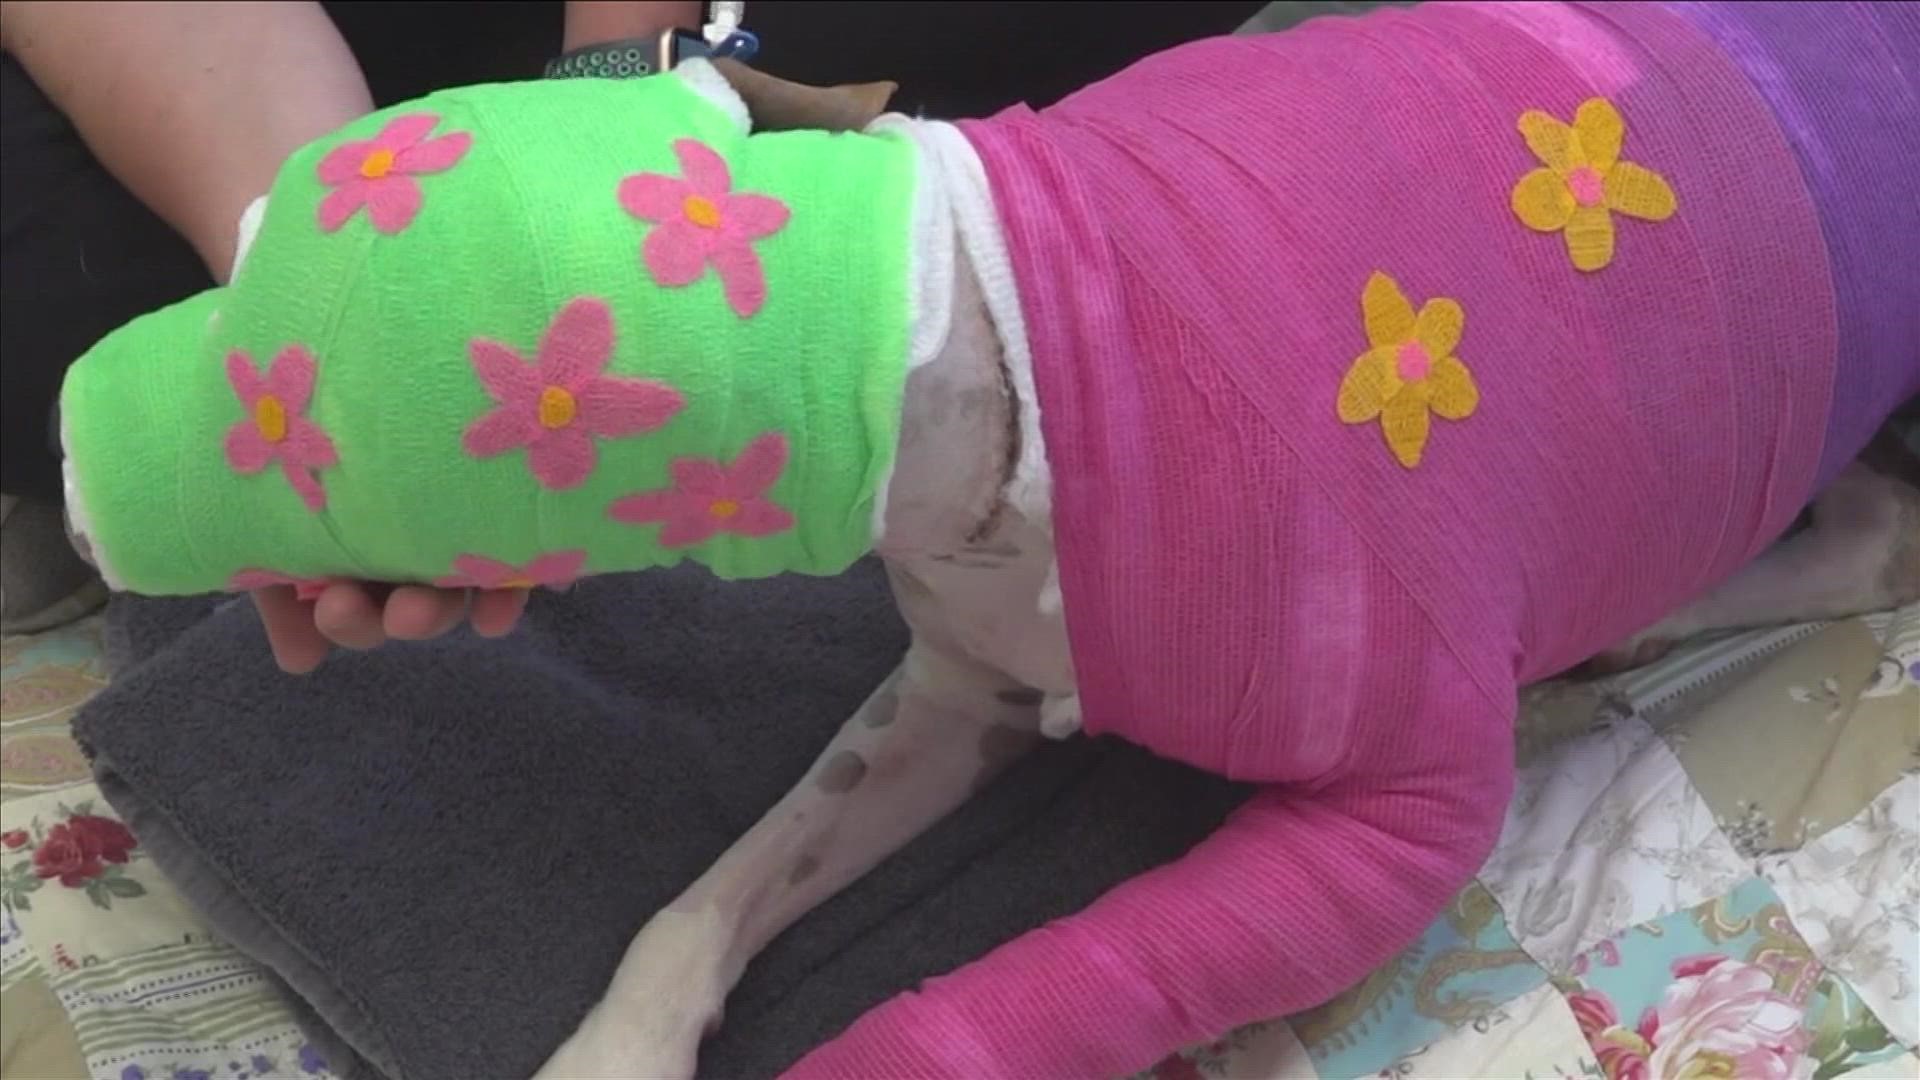 The dog is being treated and cared for after investigators said she had been doused with gasoline and set on fire.